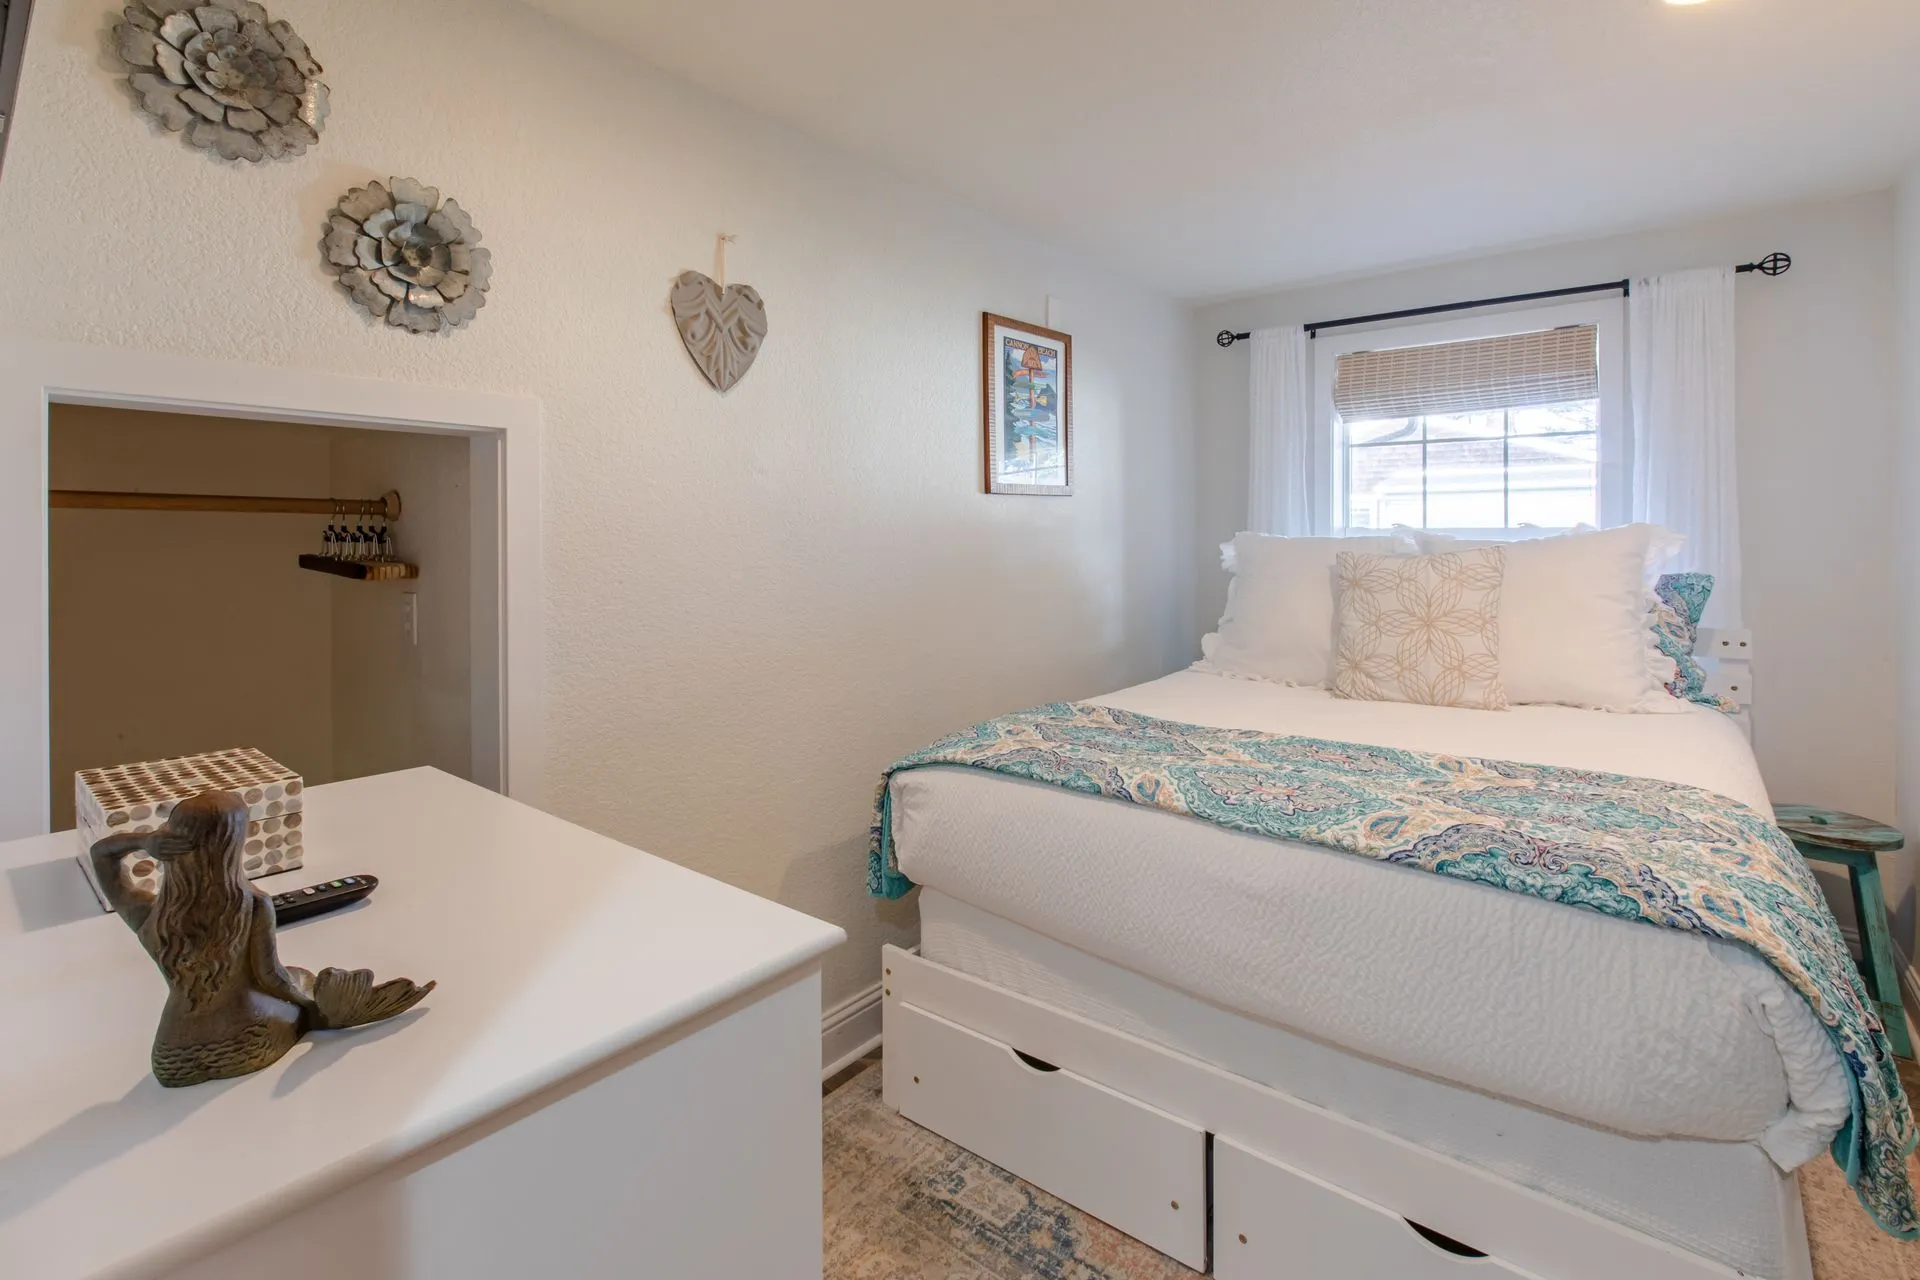 Vacation Rental in Cannon Beach, Puffin Nest bedroom